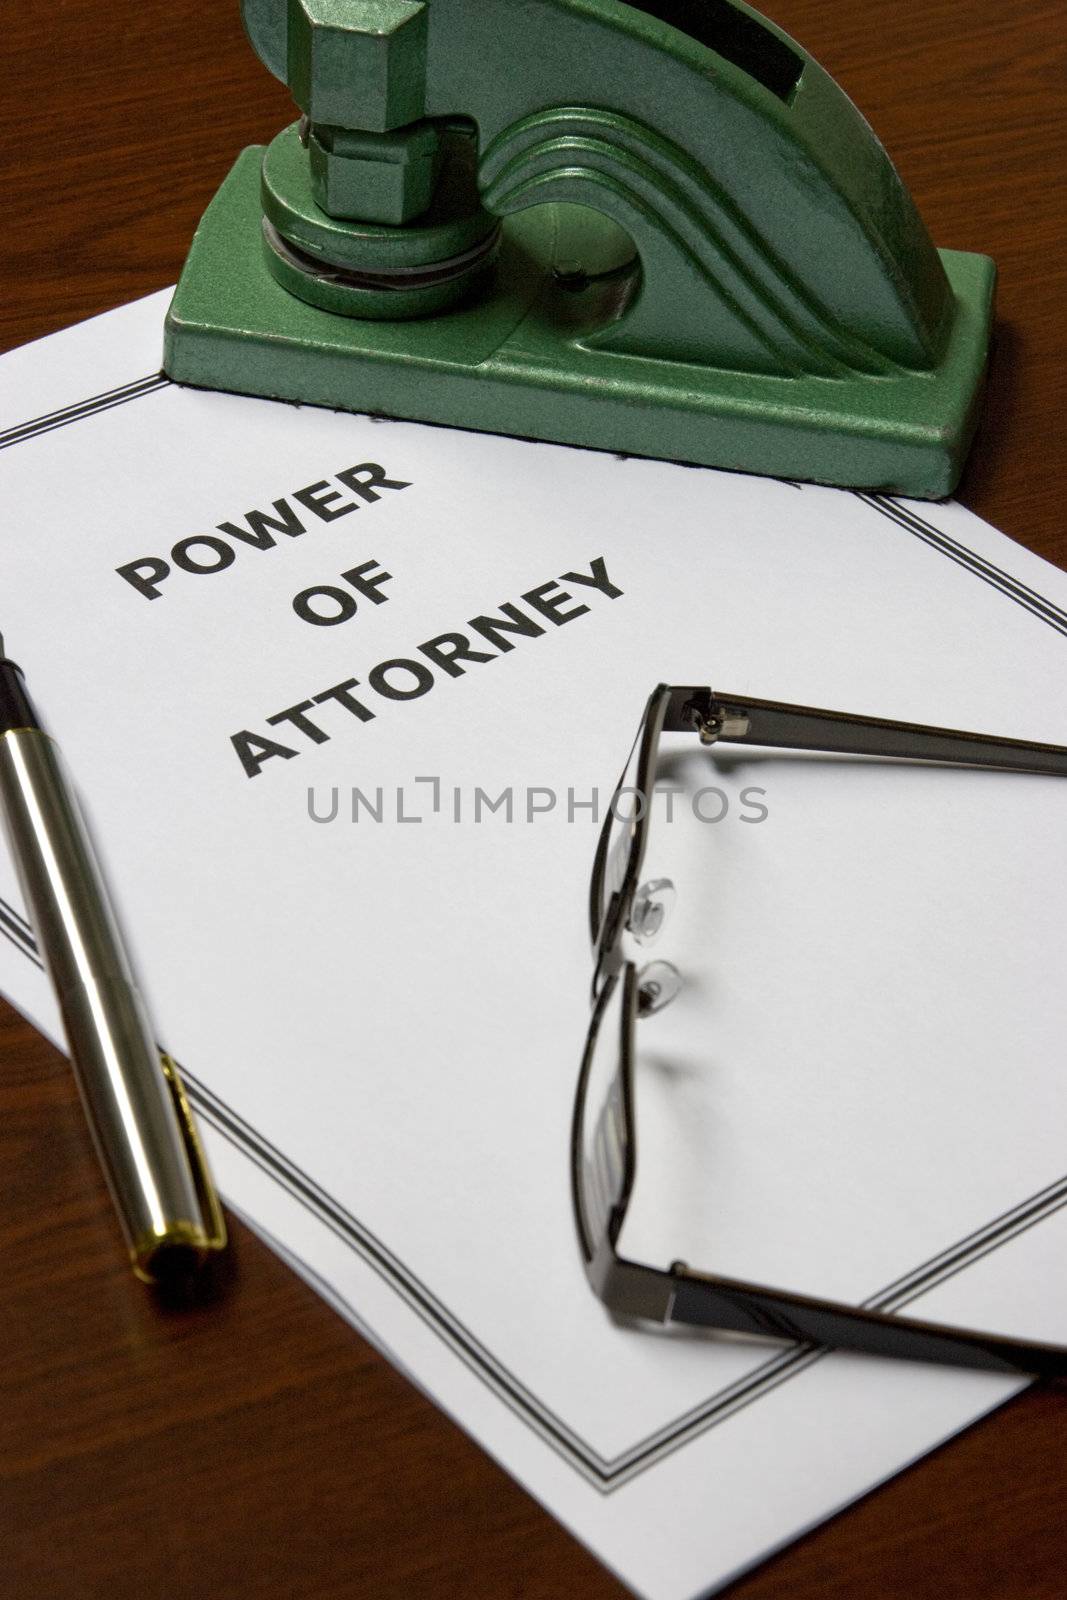 Power of Attorney by shariffc